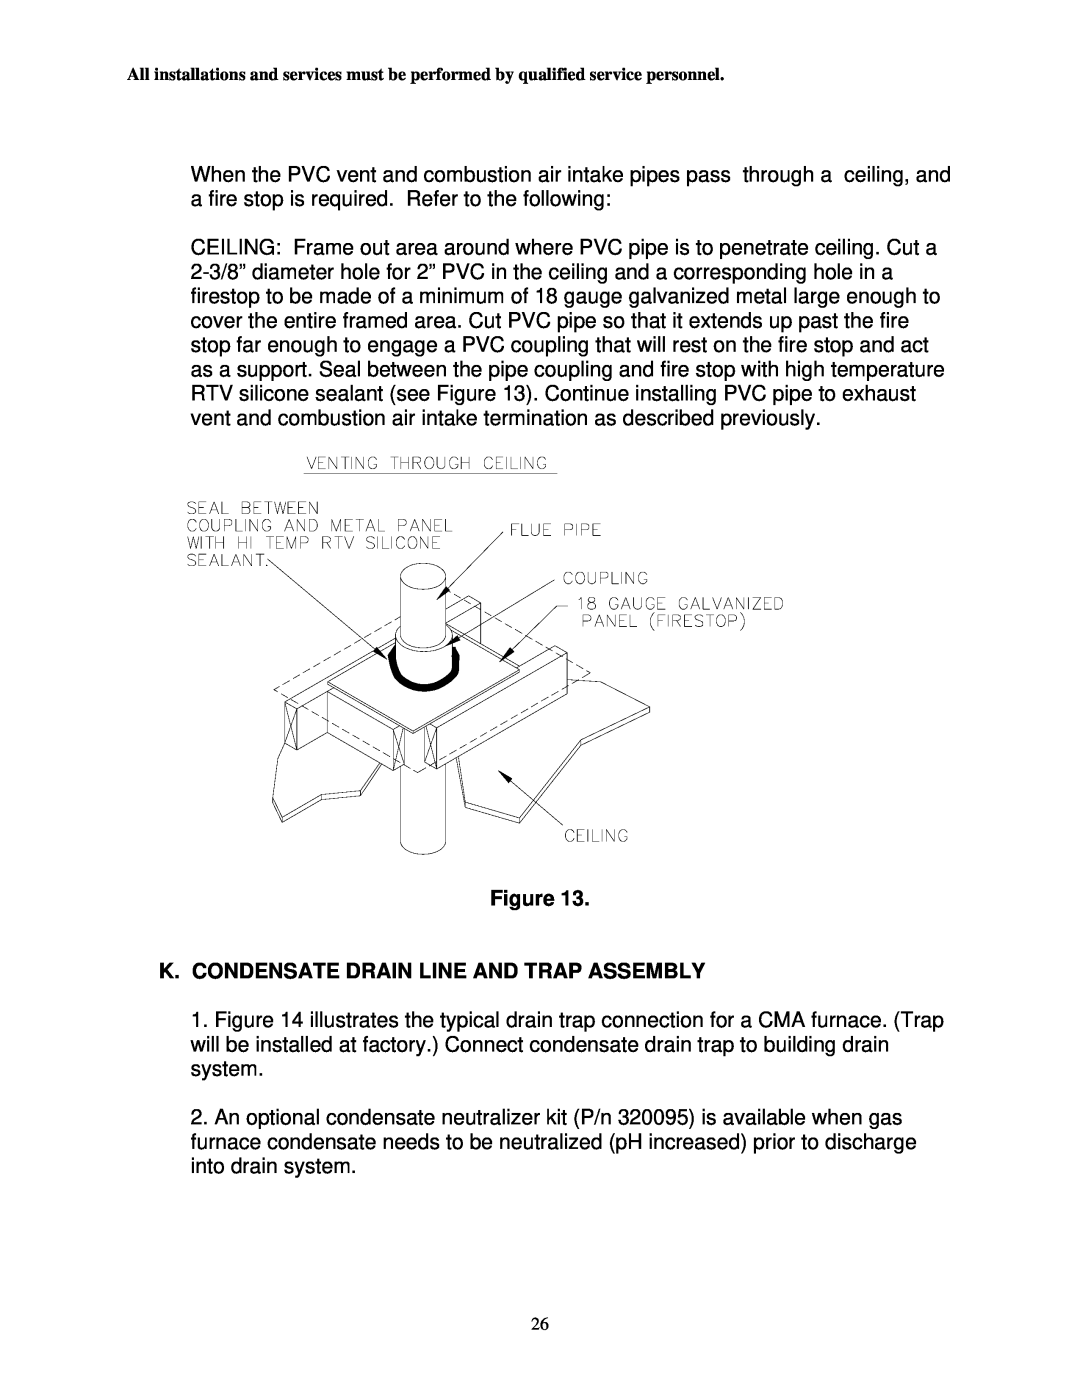 Thermo Products CMA2-75N, CMA1-50N service manual Figure K.CONDENSATE DRAIN LINE AND TRAP ASSEMBLY 